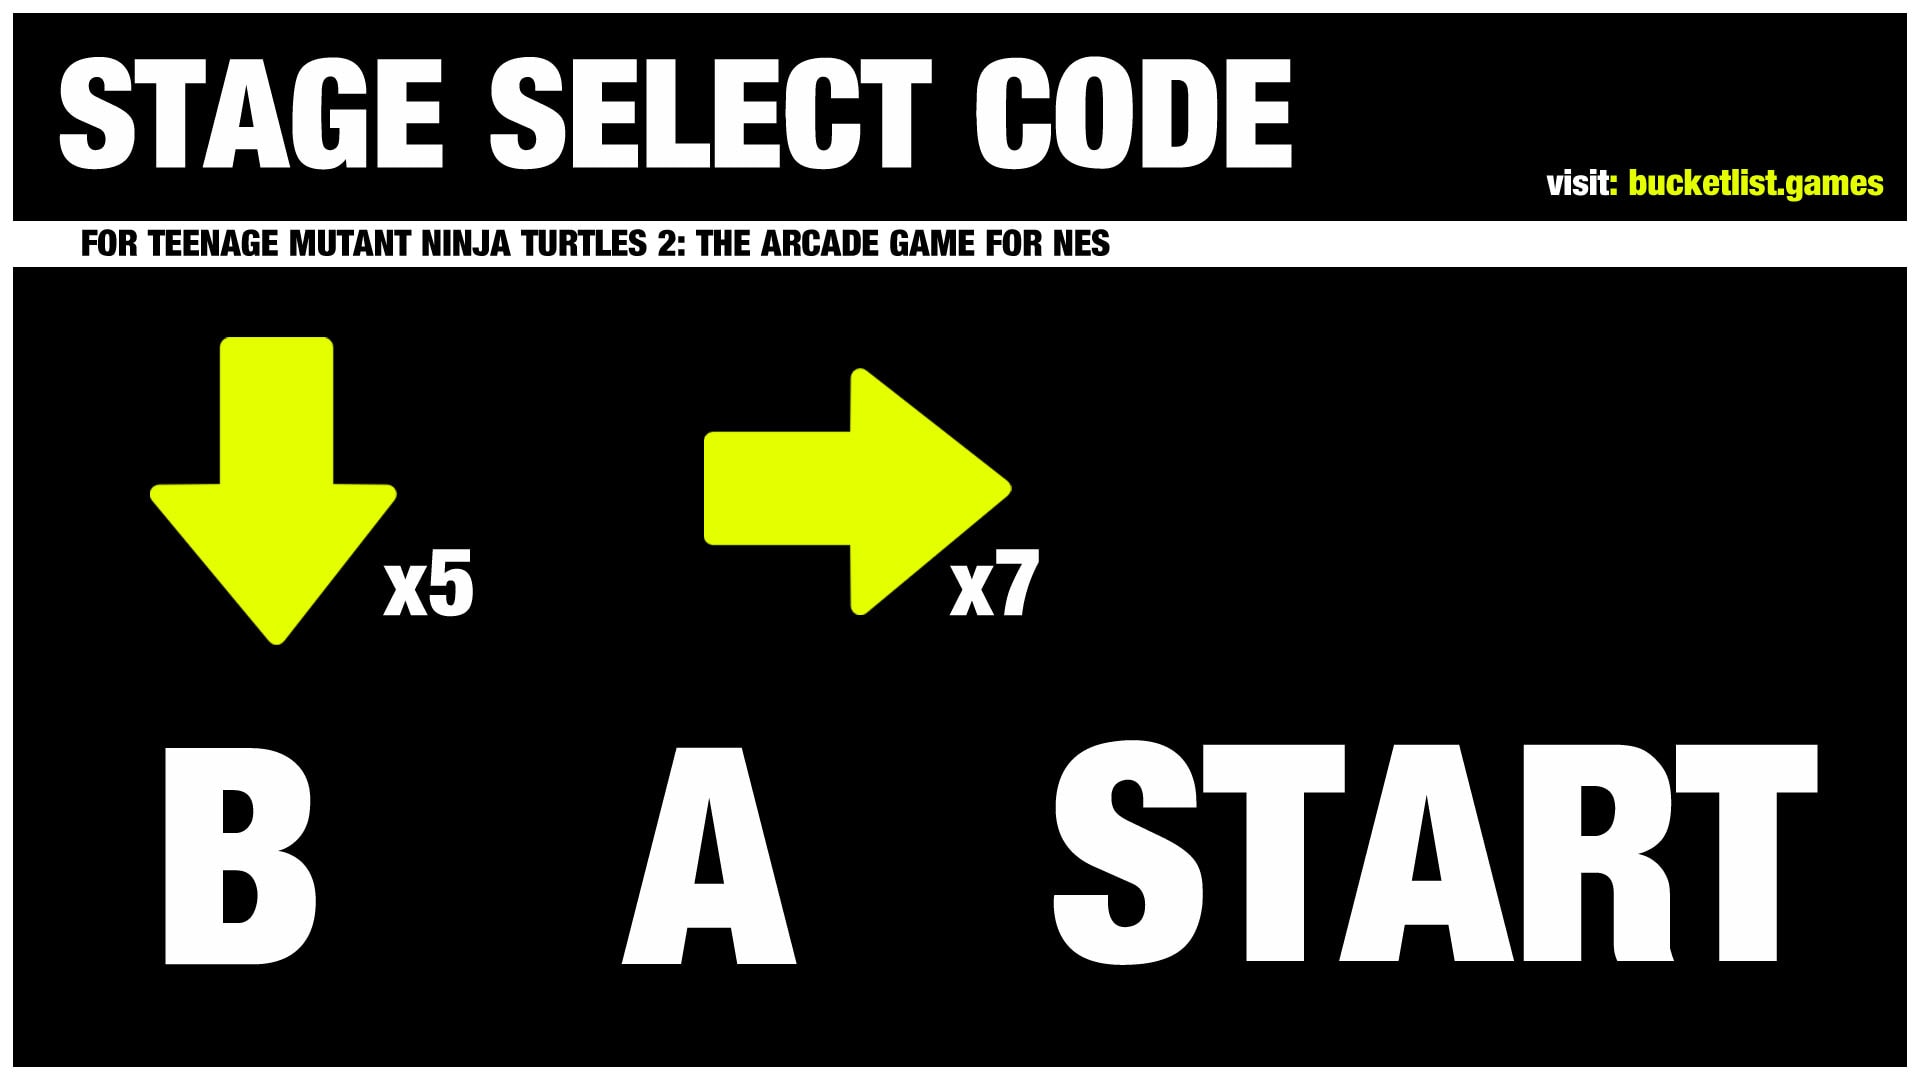 Stage Select code text on black background